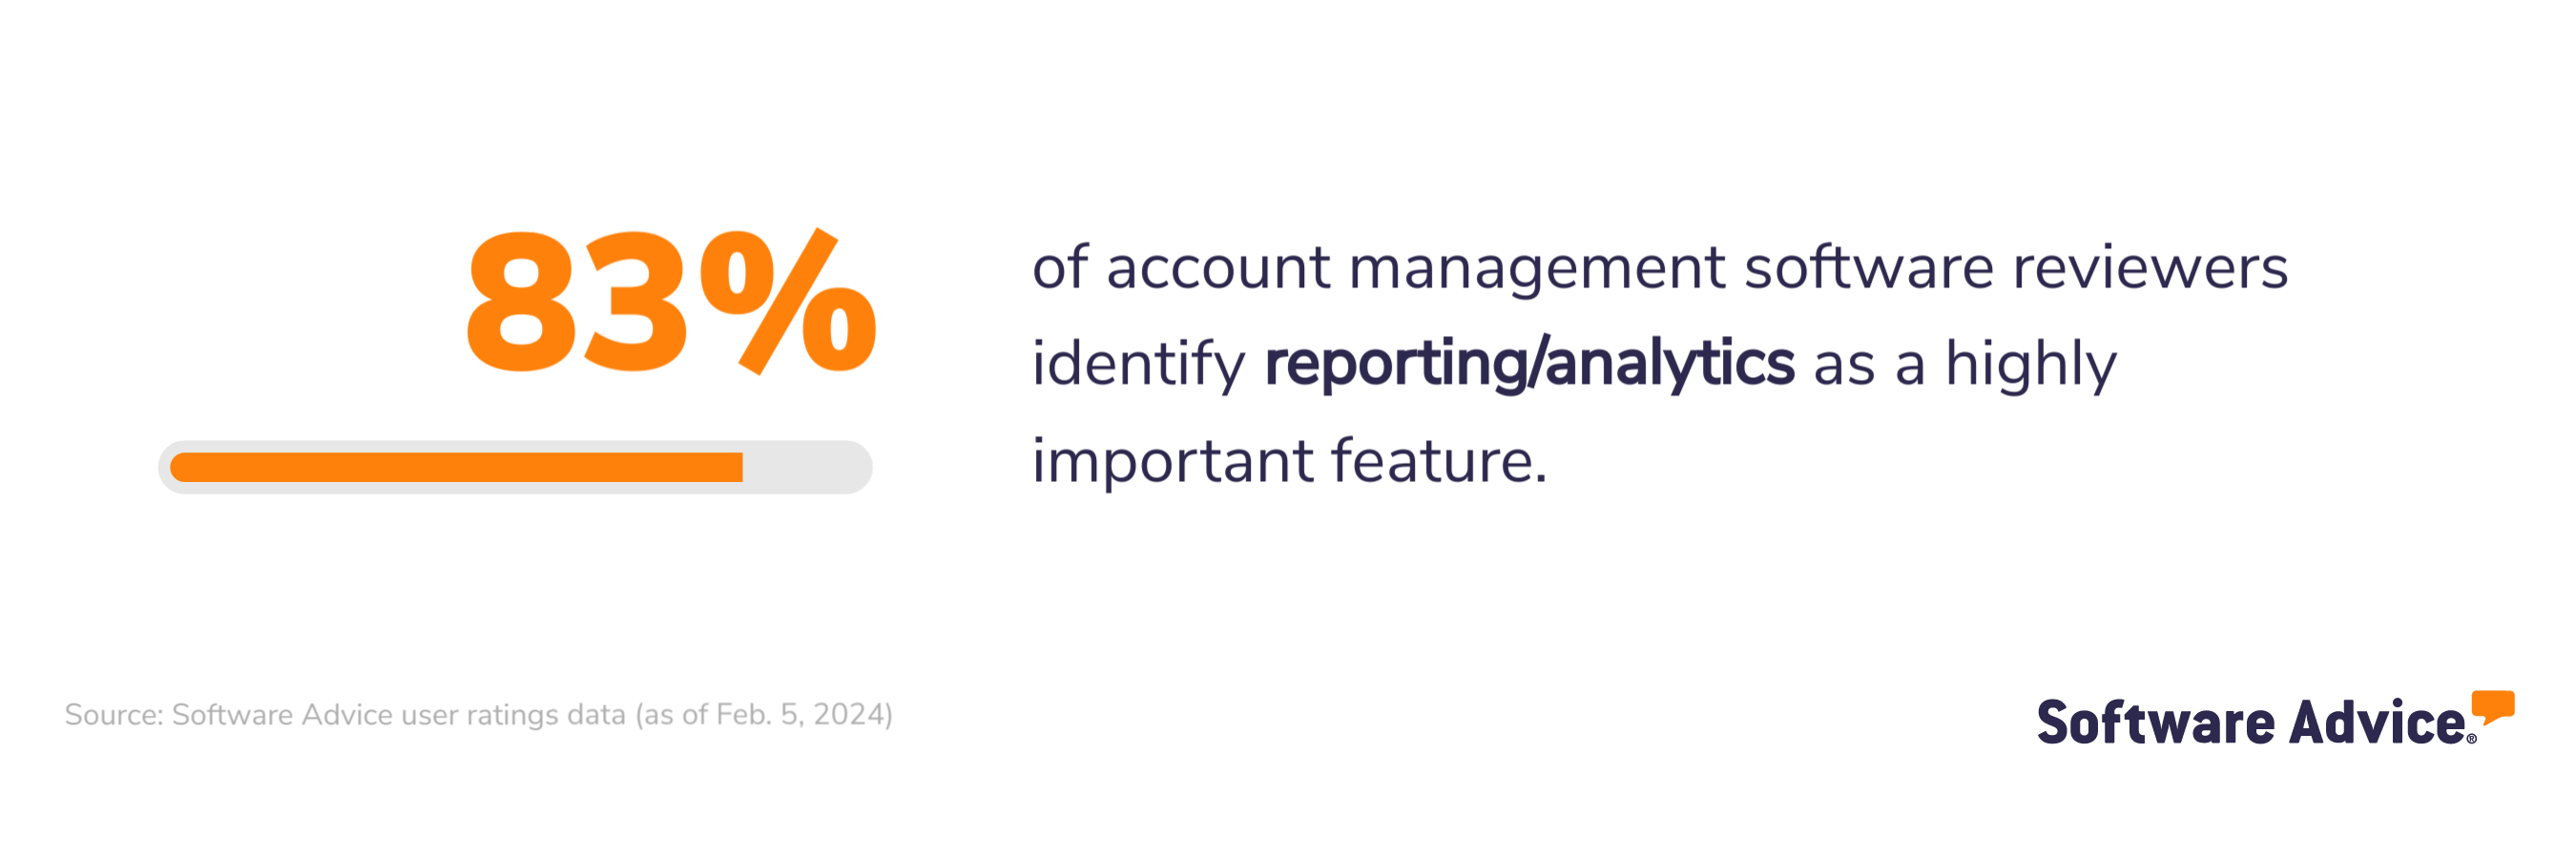 Reporting and analytics feature of account management software